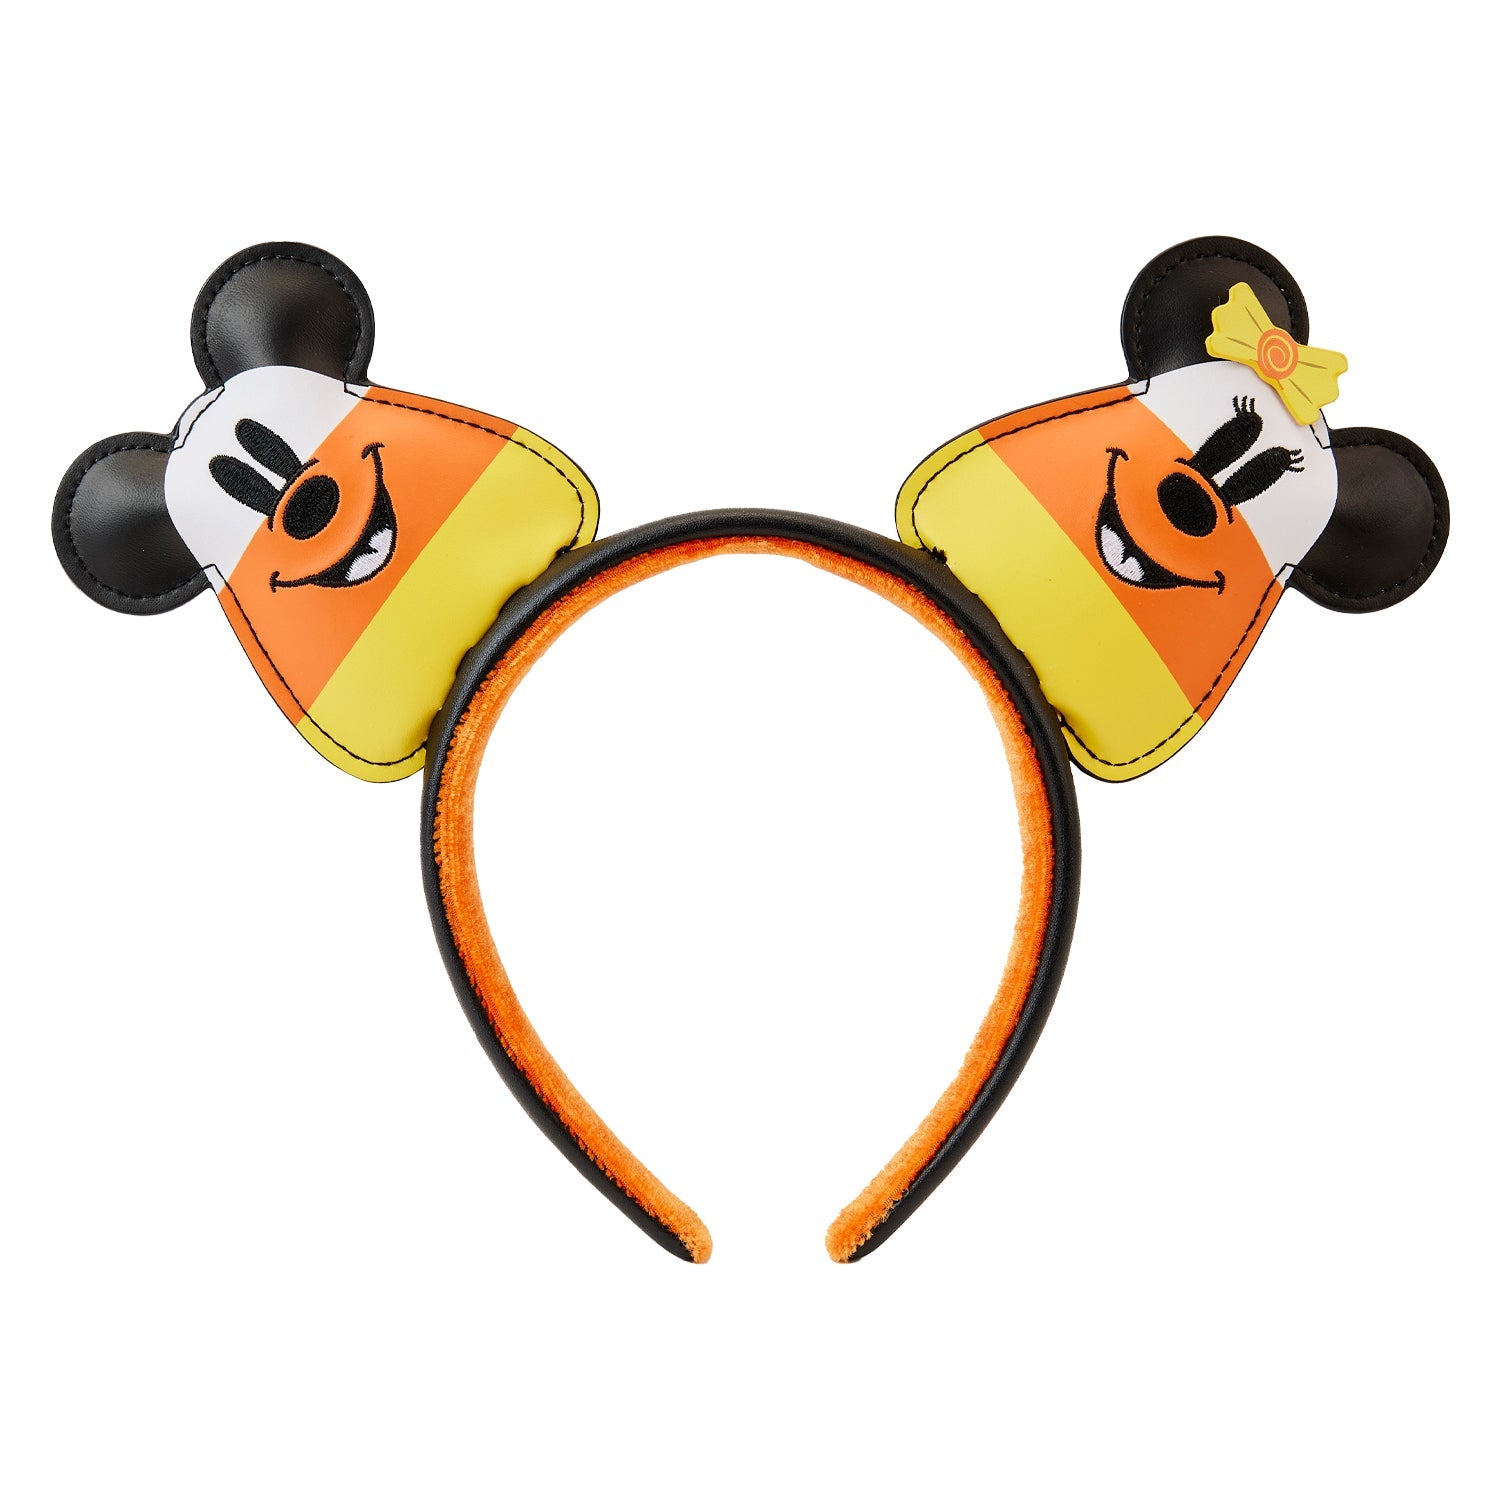 Loungefly x Disney Minnie and Minnie Mouse Candy Corn Ears Headband - GeekCore